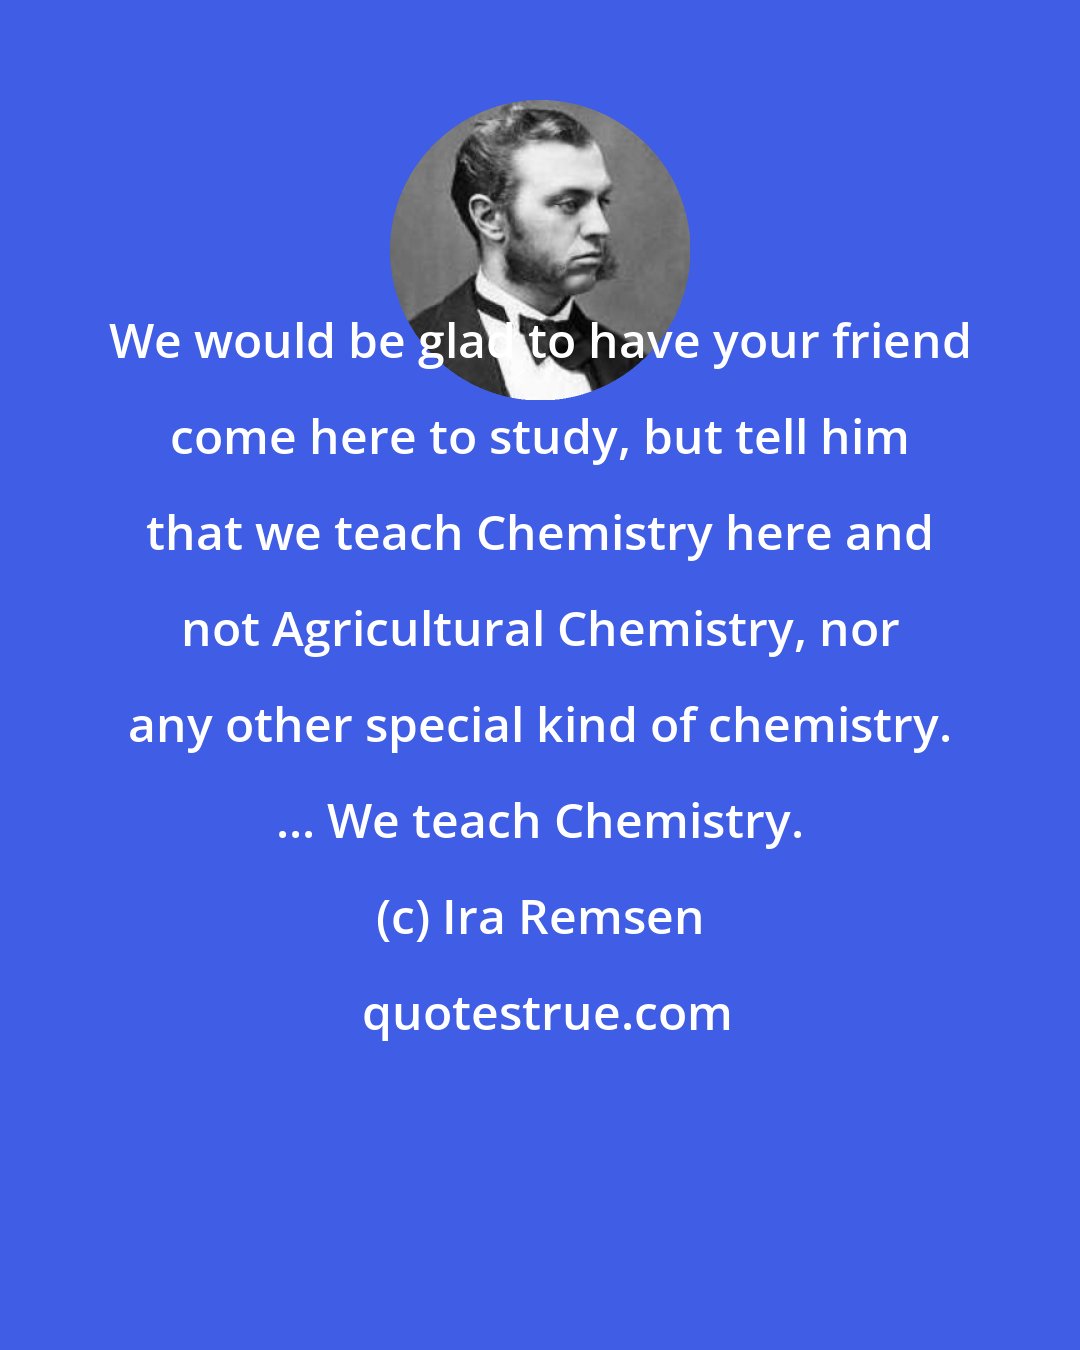 Ira Remsen: We would be glad to have your friend come here to study, but tell him that we teach Chemistry here and not Agricultural Chemistry, nor any other special kind of chemistry. ... We teach Chemistry.